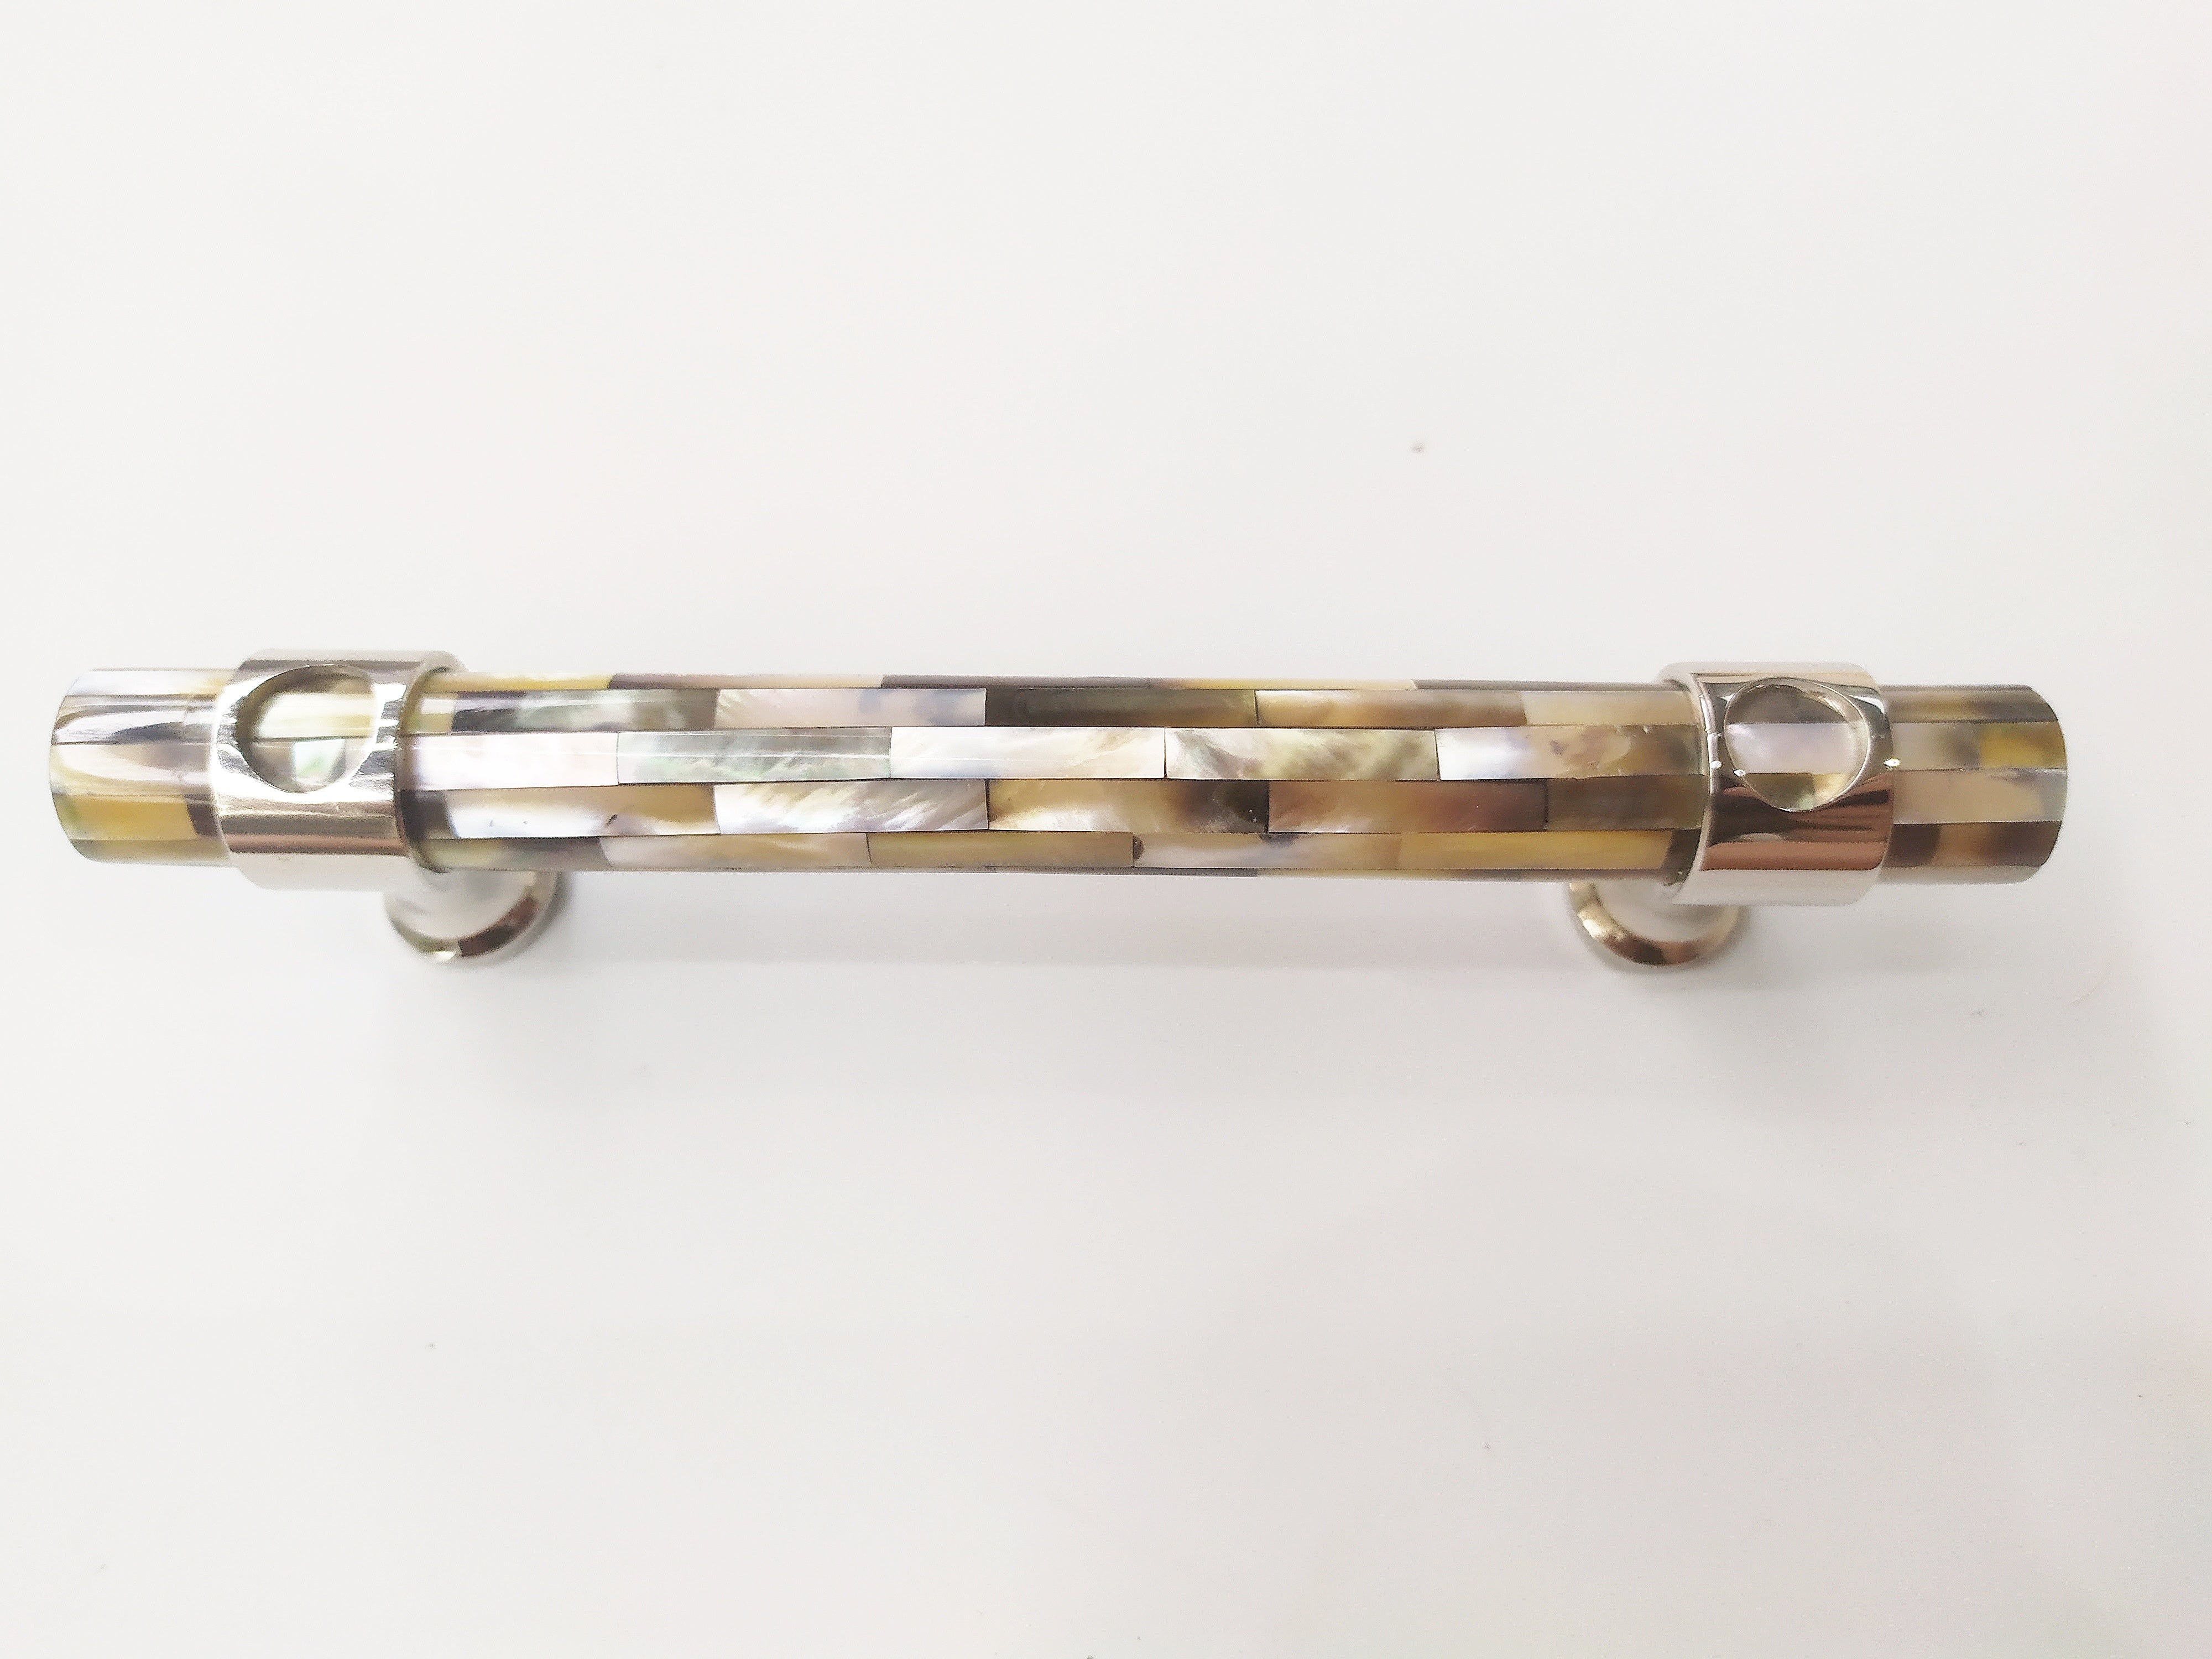 Inlaid mosaic gray mother of pearl long tube handle pull in nickel plating